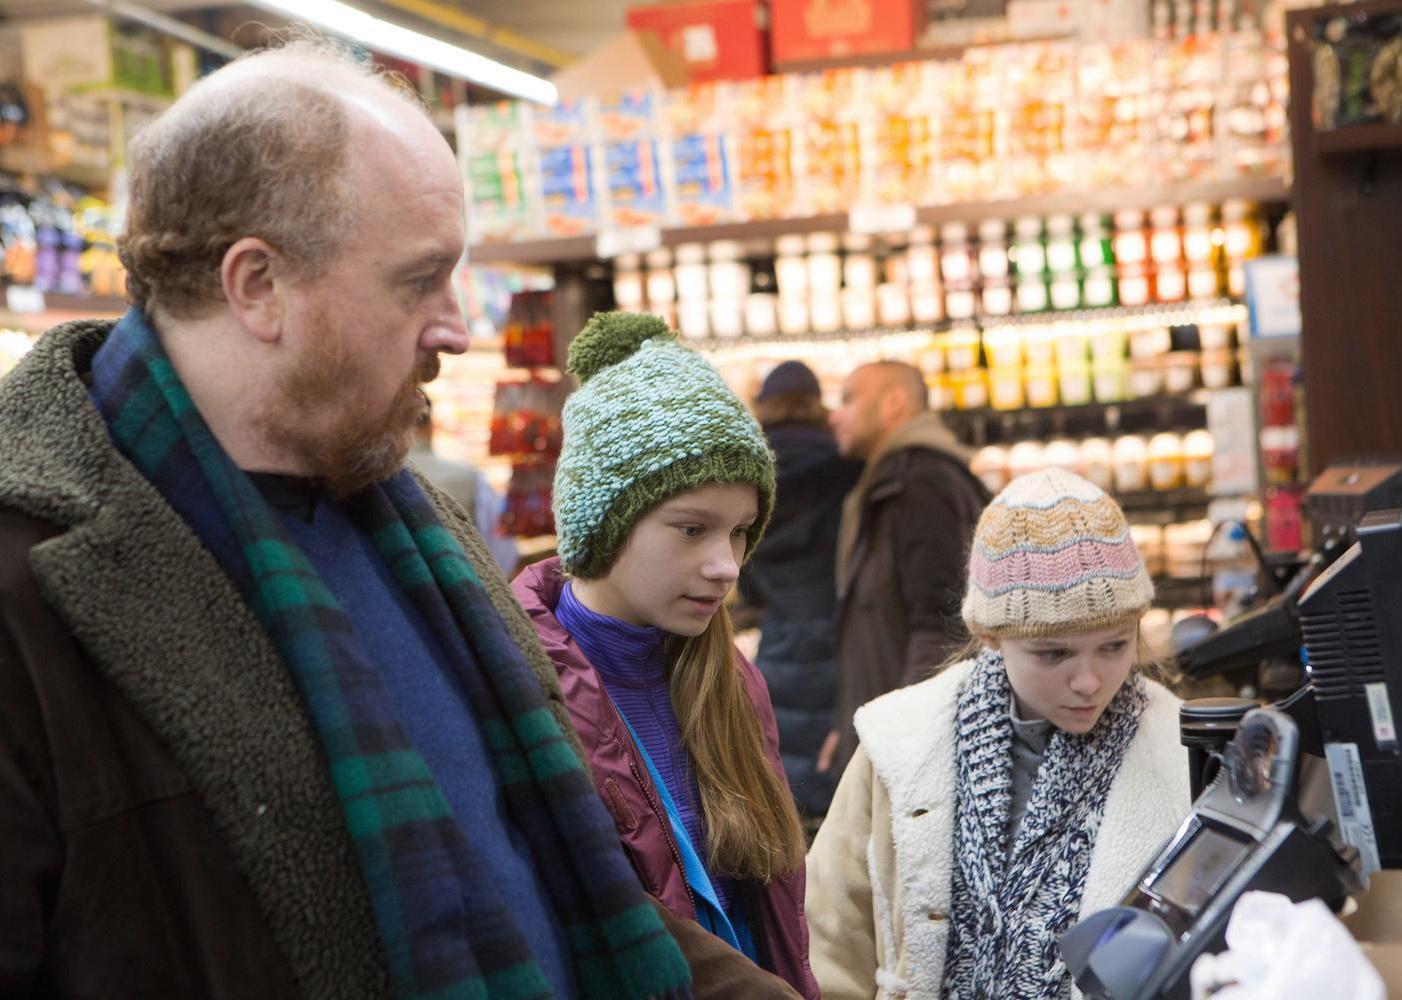 Actors in a scene from ‘Louie’.